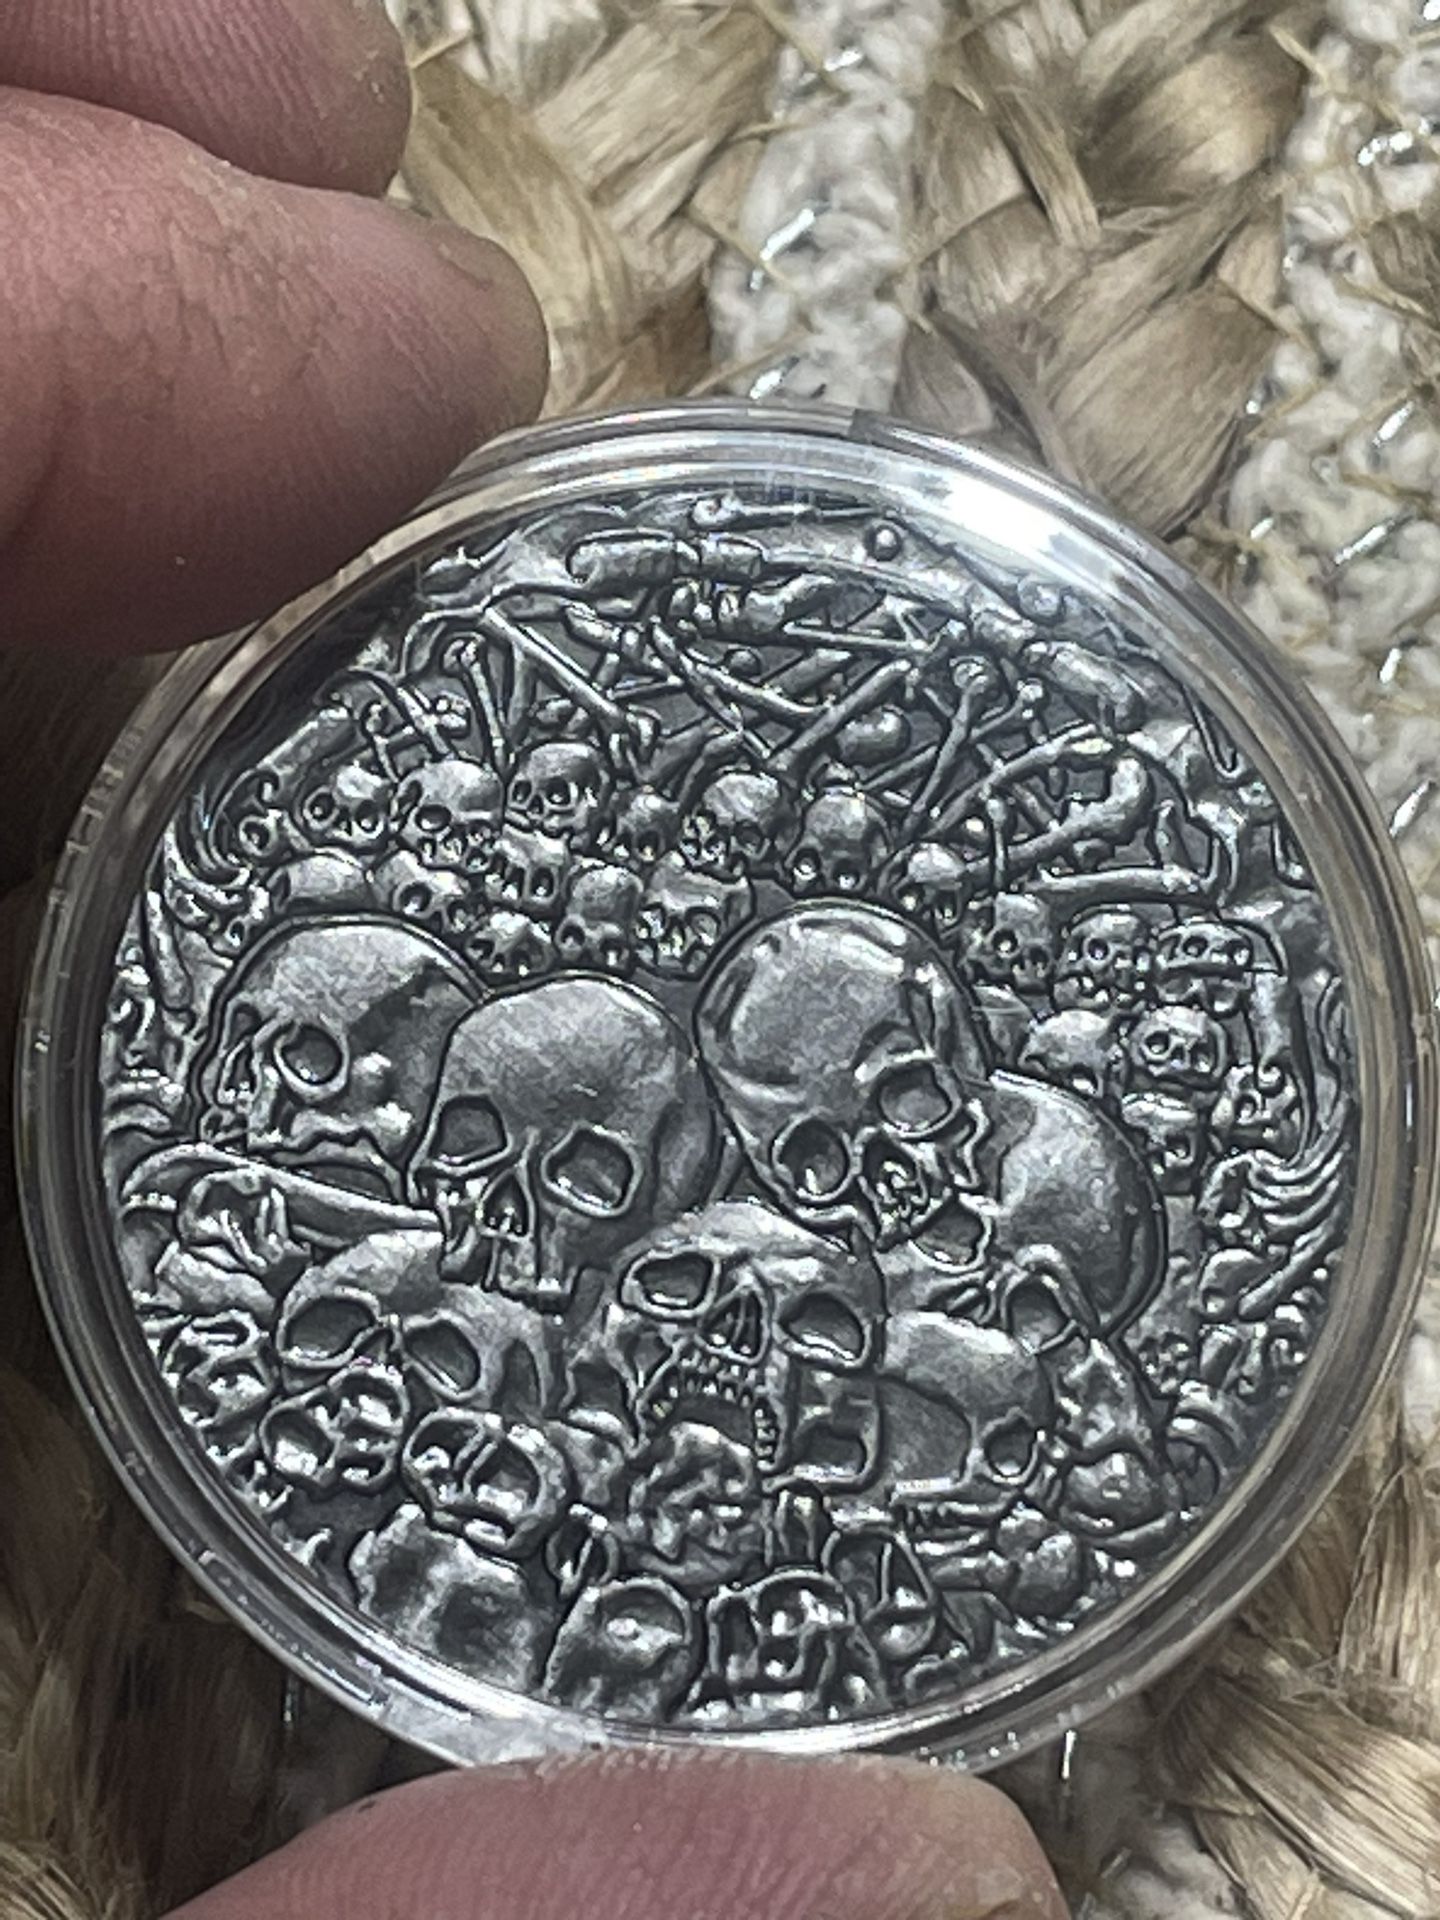 Awesome coin